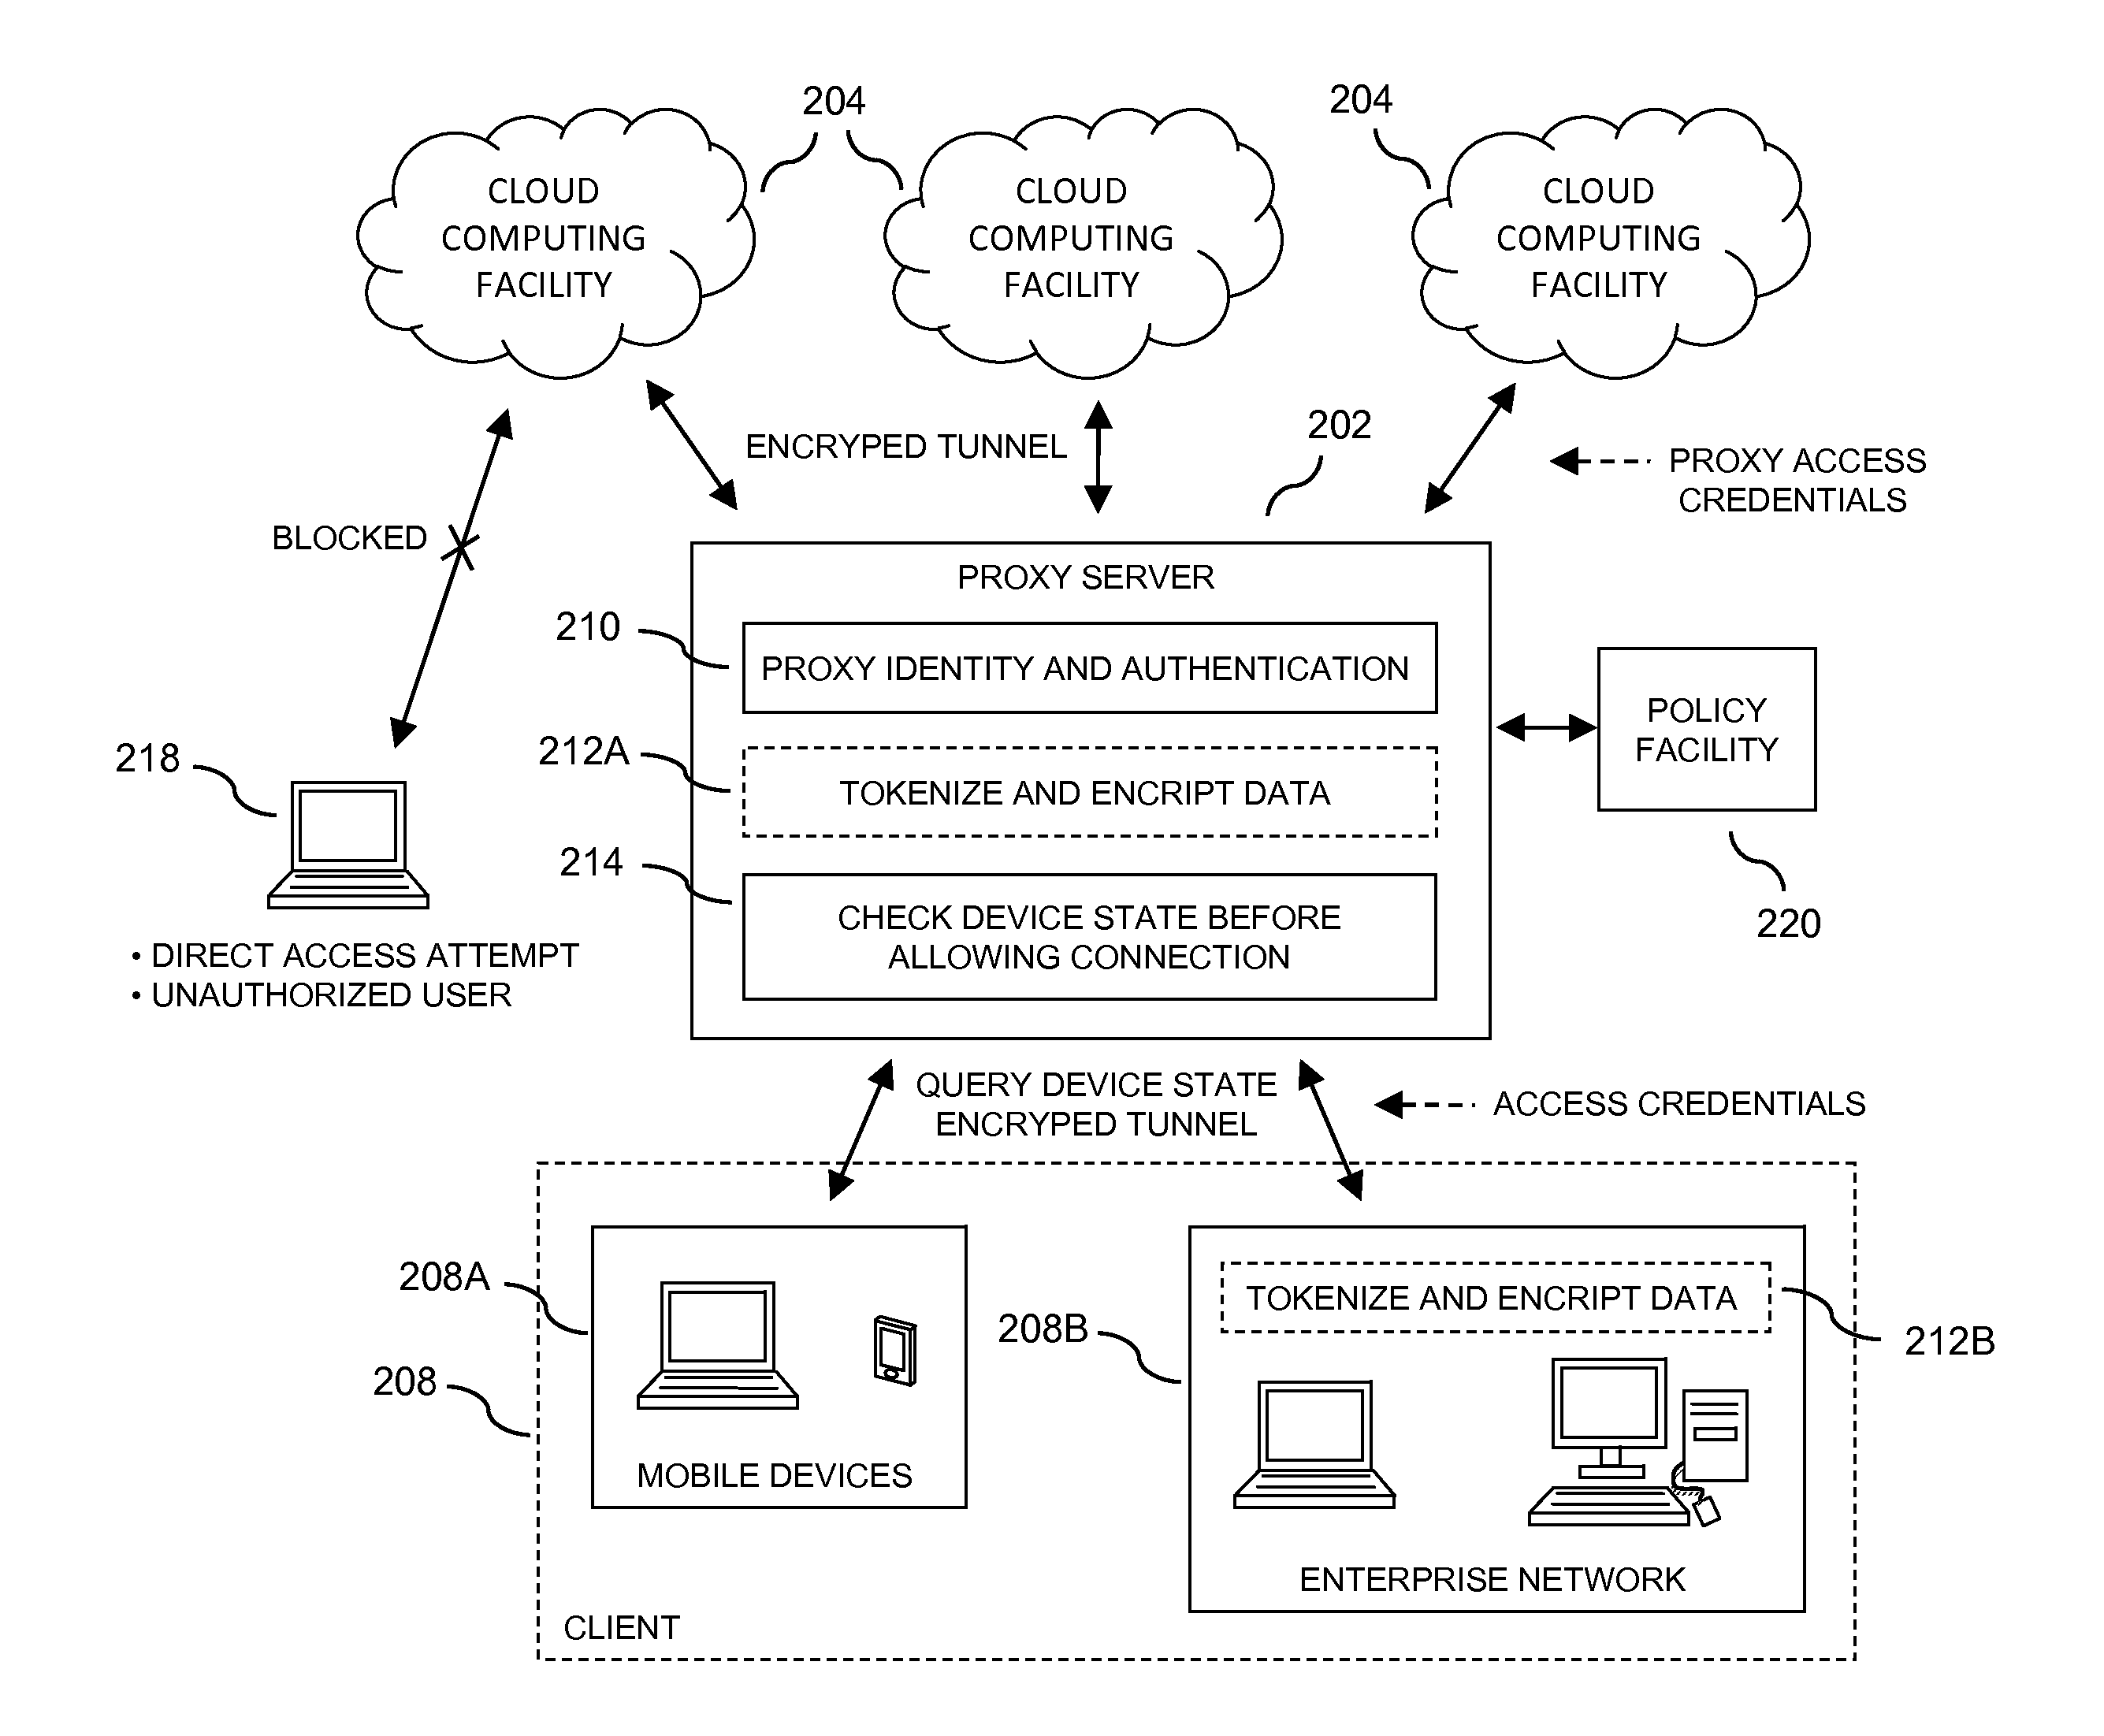 Security access protection for user data stored in a cloud computing facility